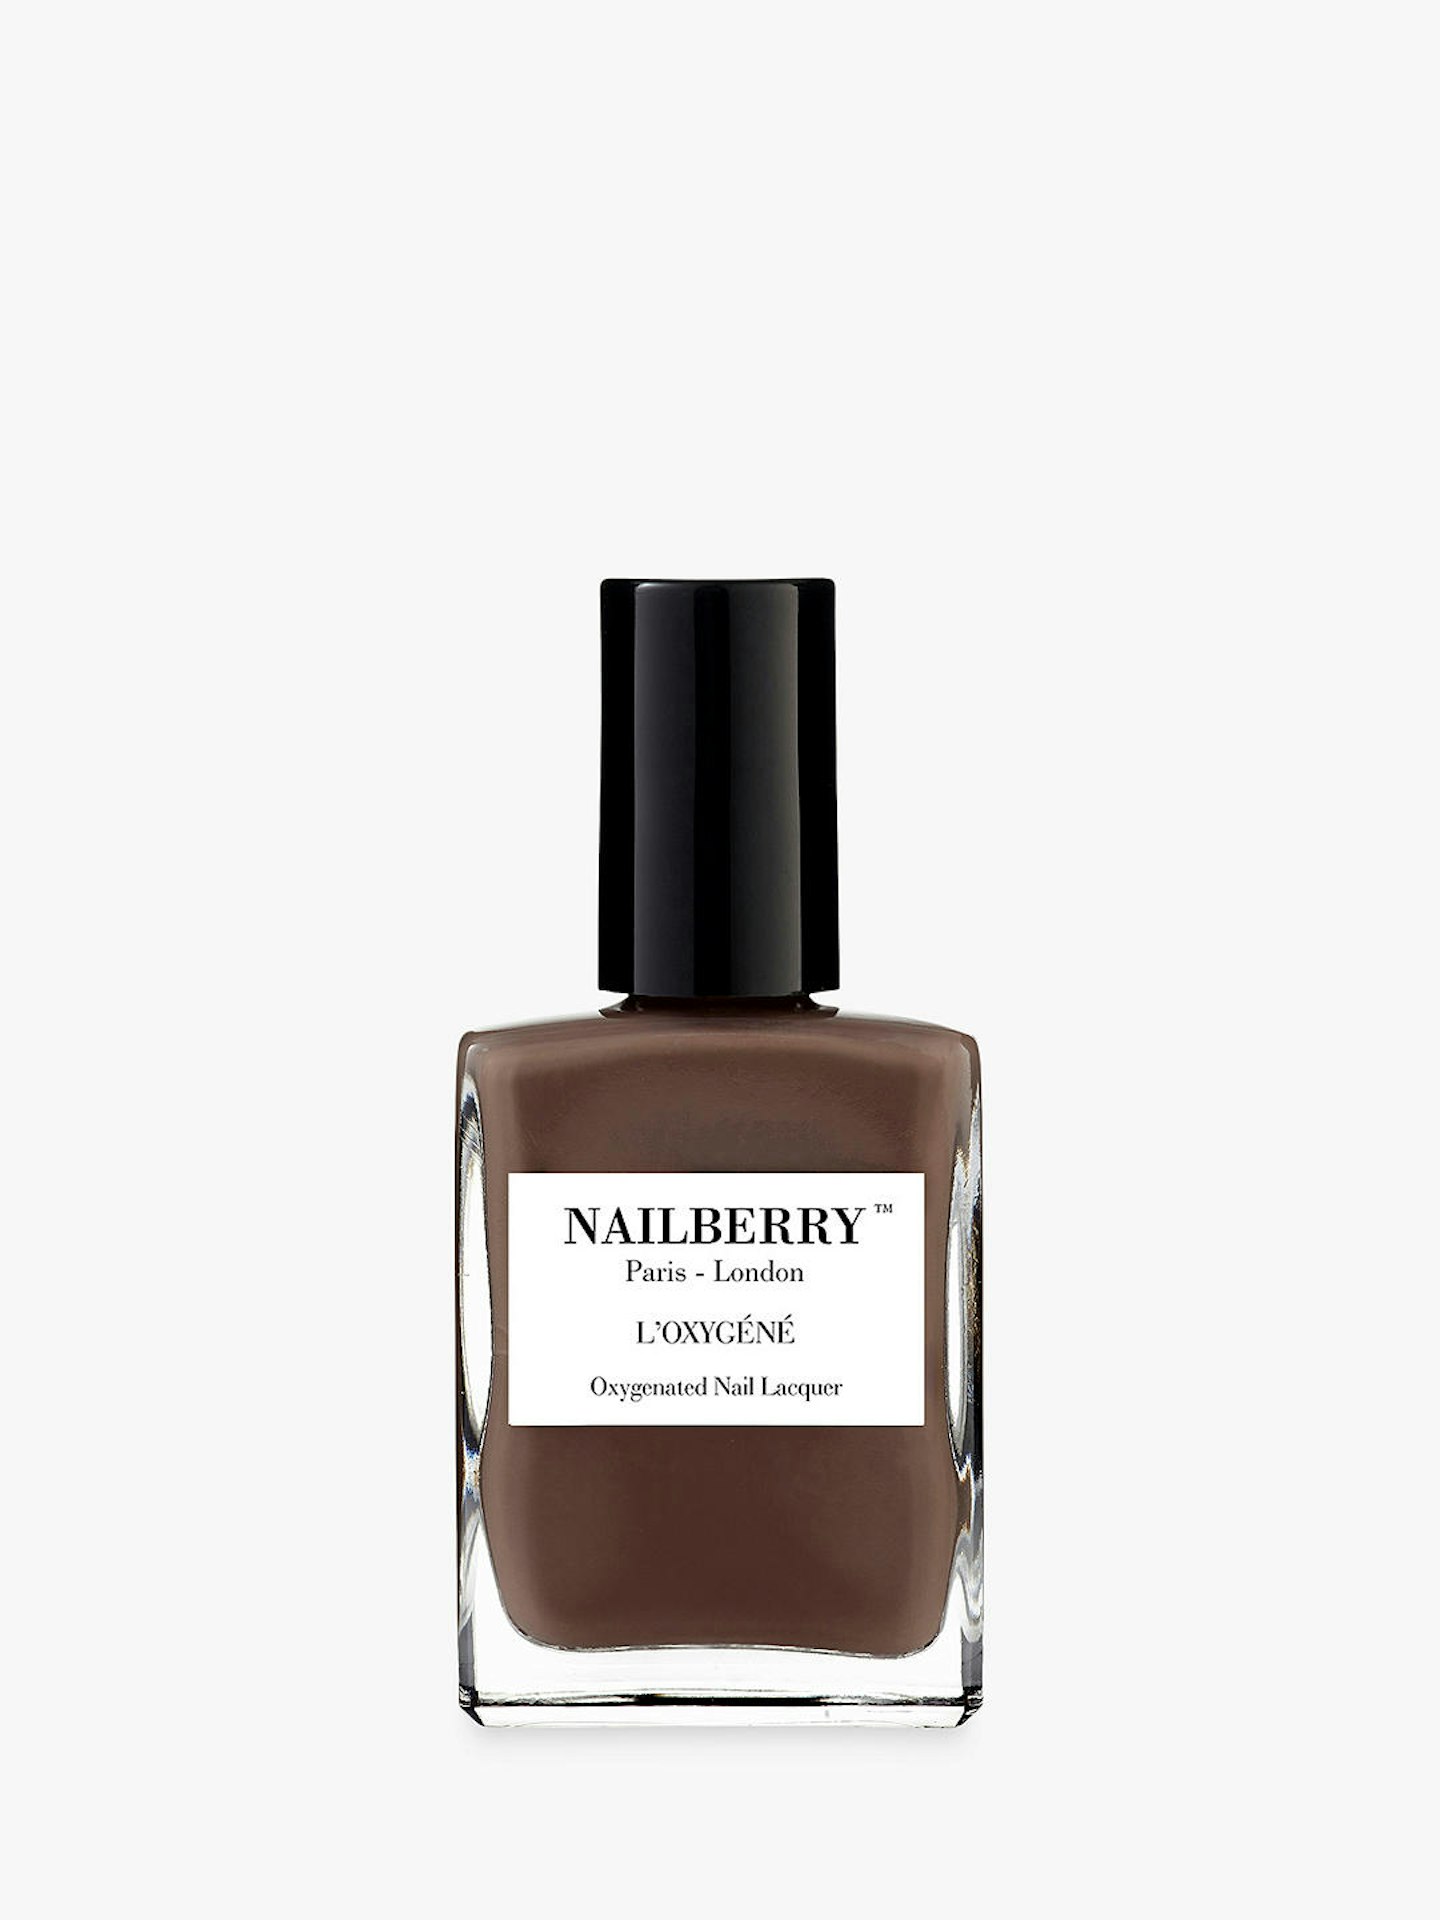 Nailberry L'Oxygéné Oxygenated Nail Lacquer, Taupe LA